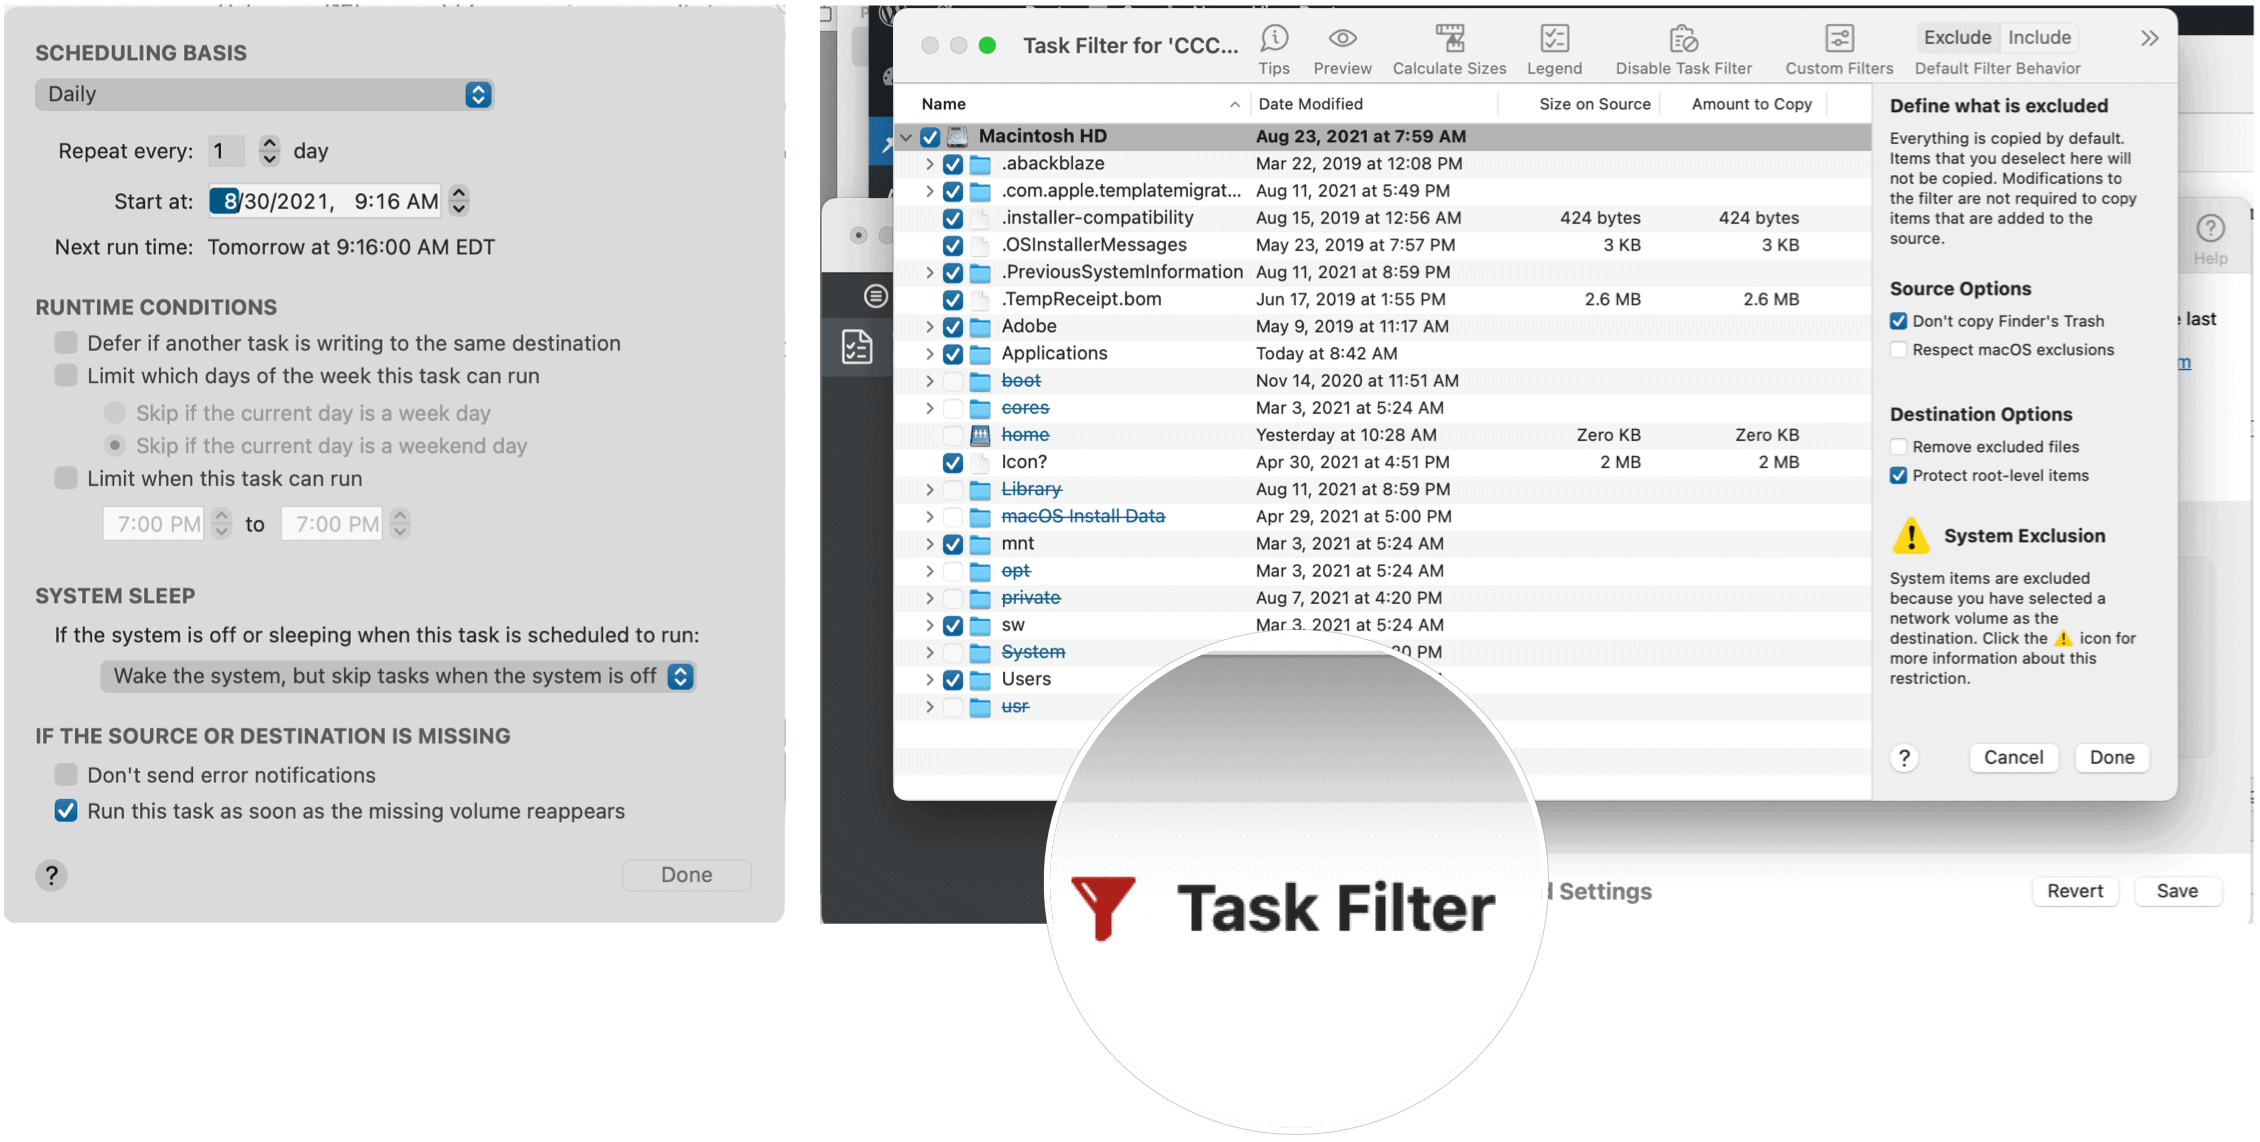 Schedule and task filter